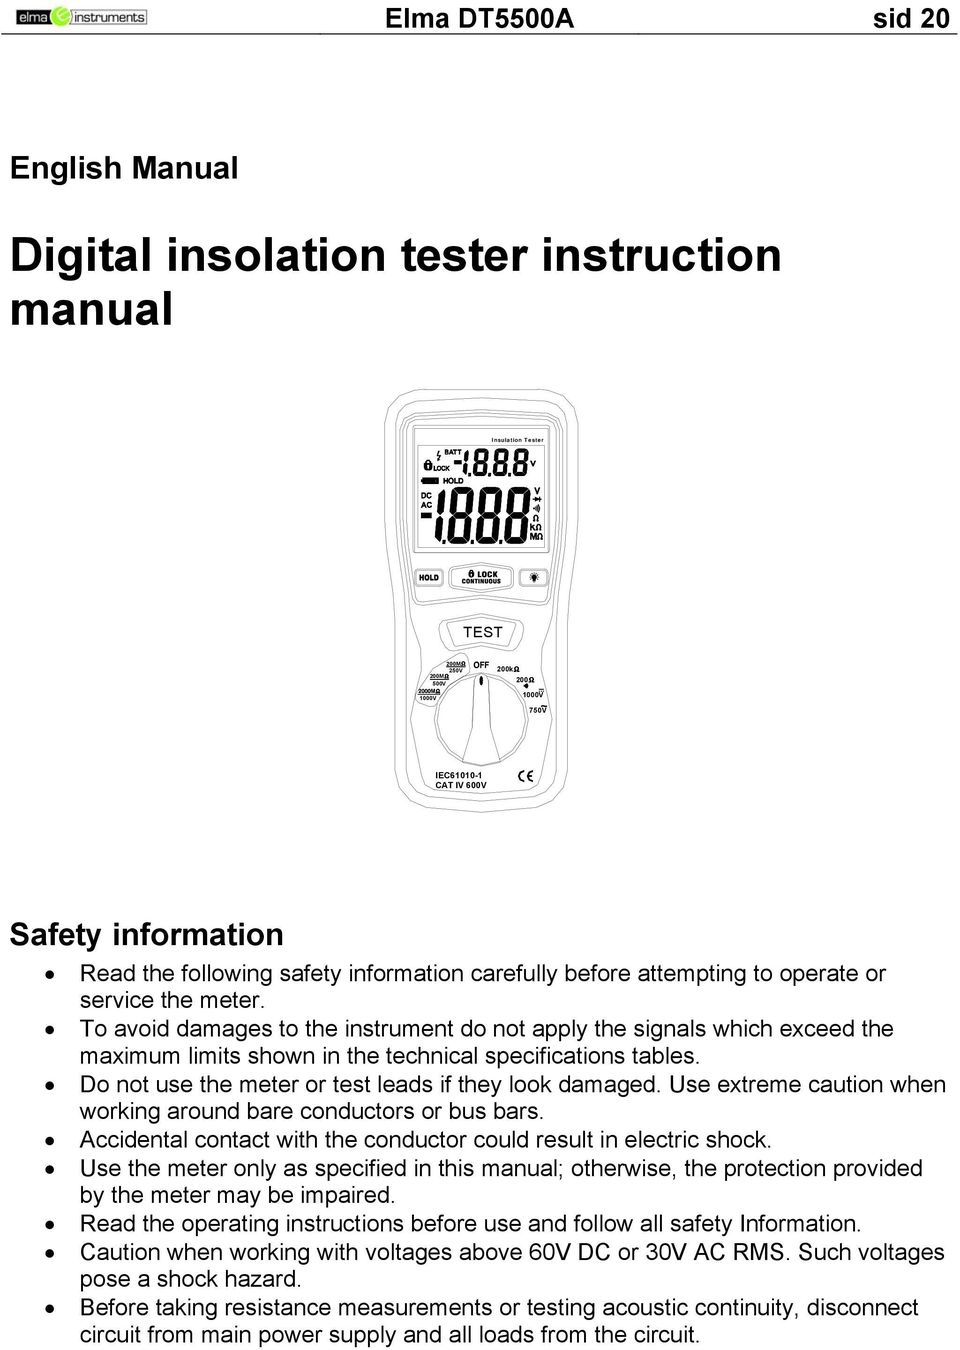 To avoid damages to the instrument do not apply the signals which exceed the maximum limits shown in the technical specifications tables. Do not use the meter or test leads if they look damaged.